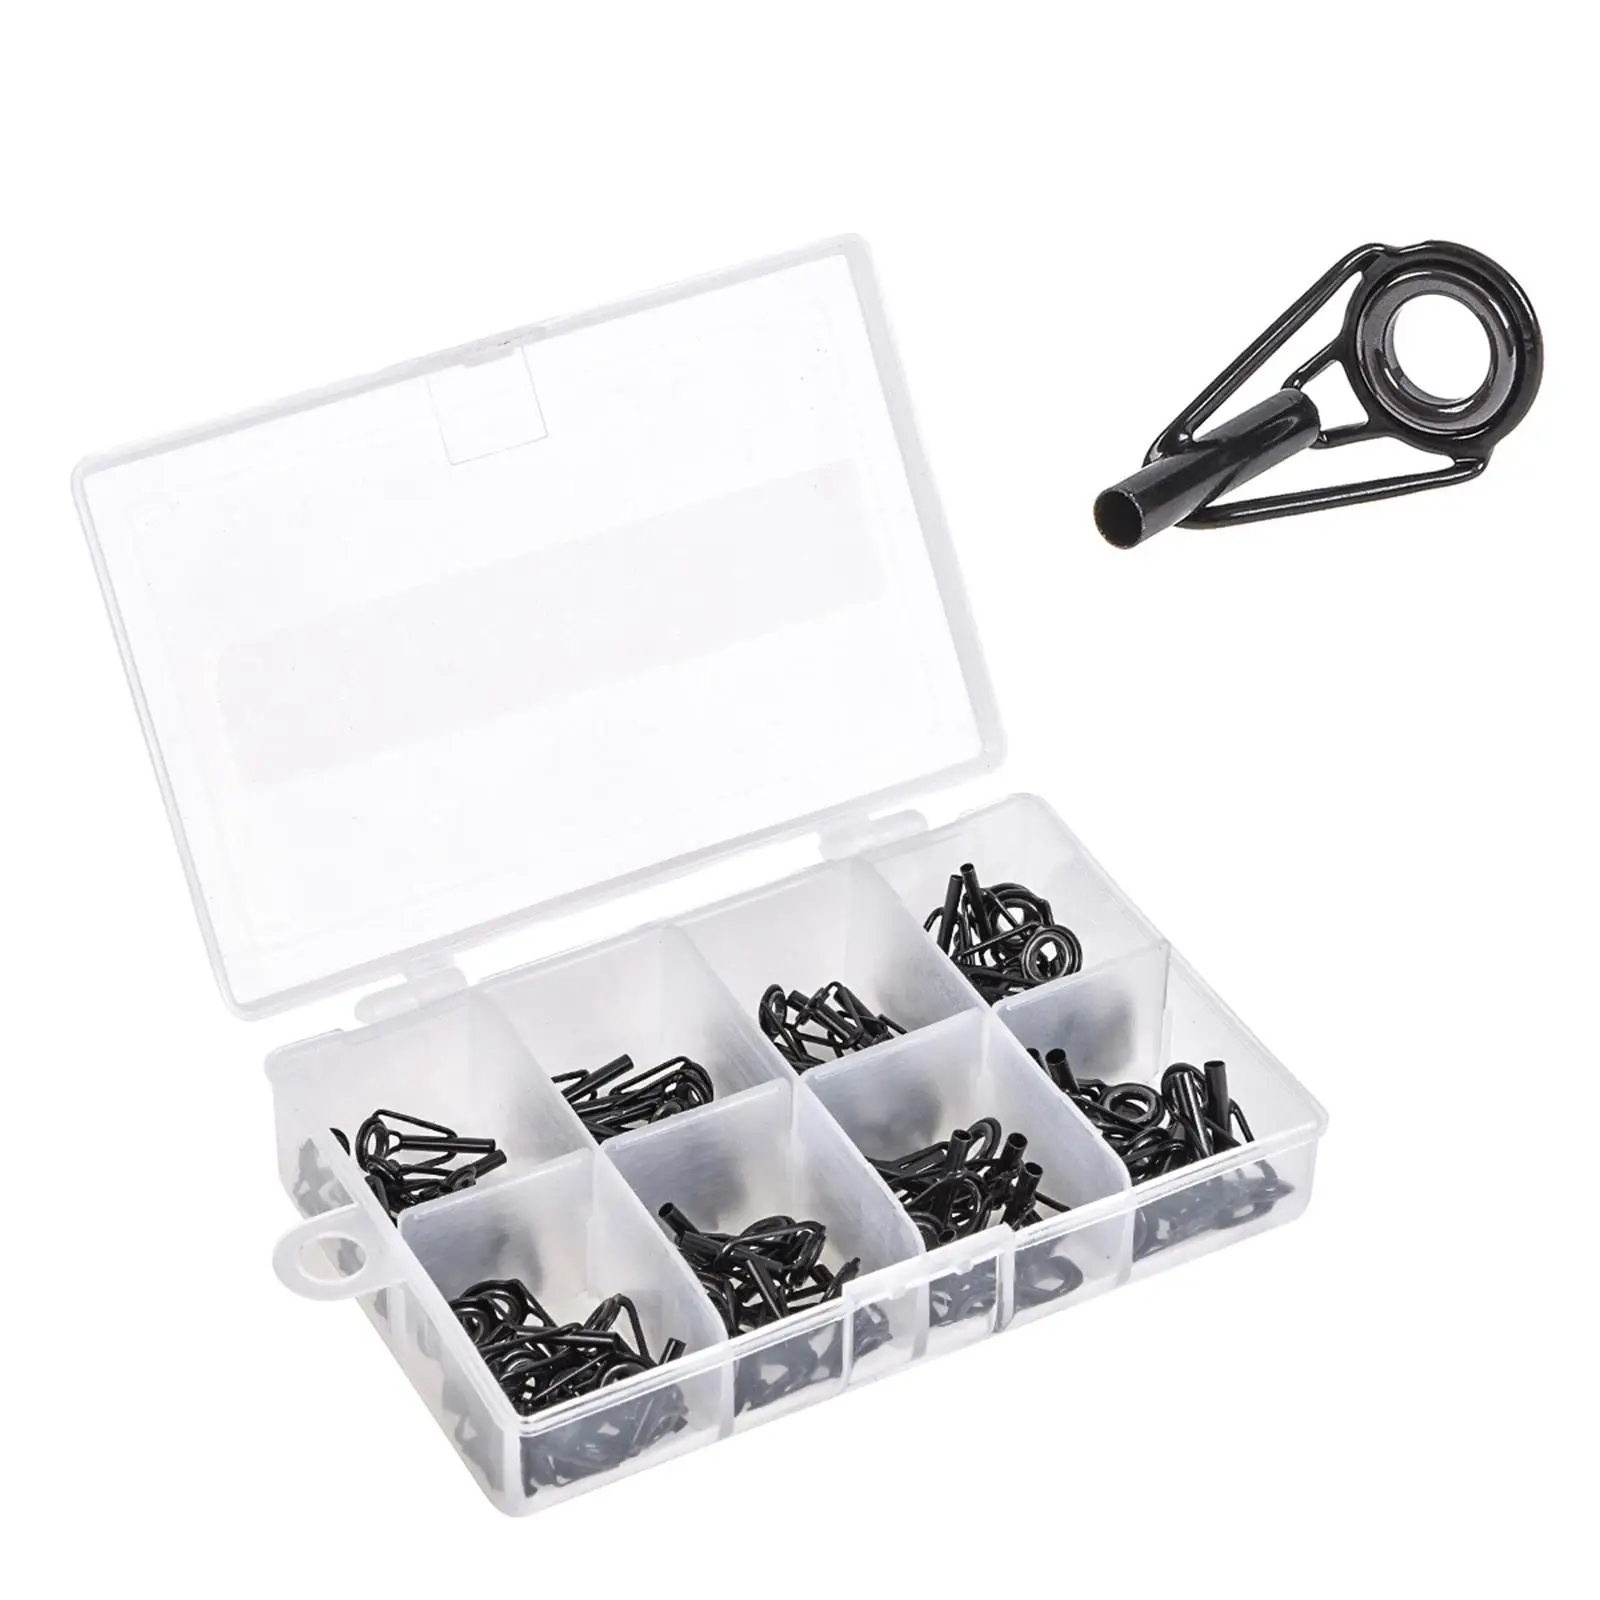 80x Fishing Rod Tips Mixed Size in A Box Replacement Stainless Steel Black